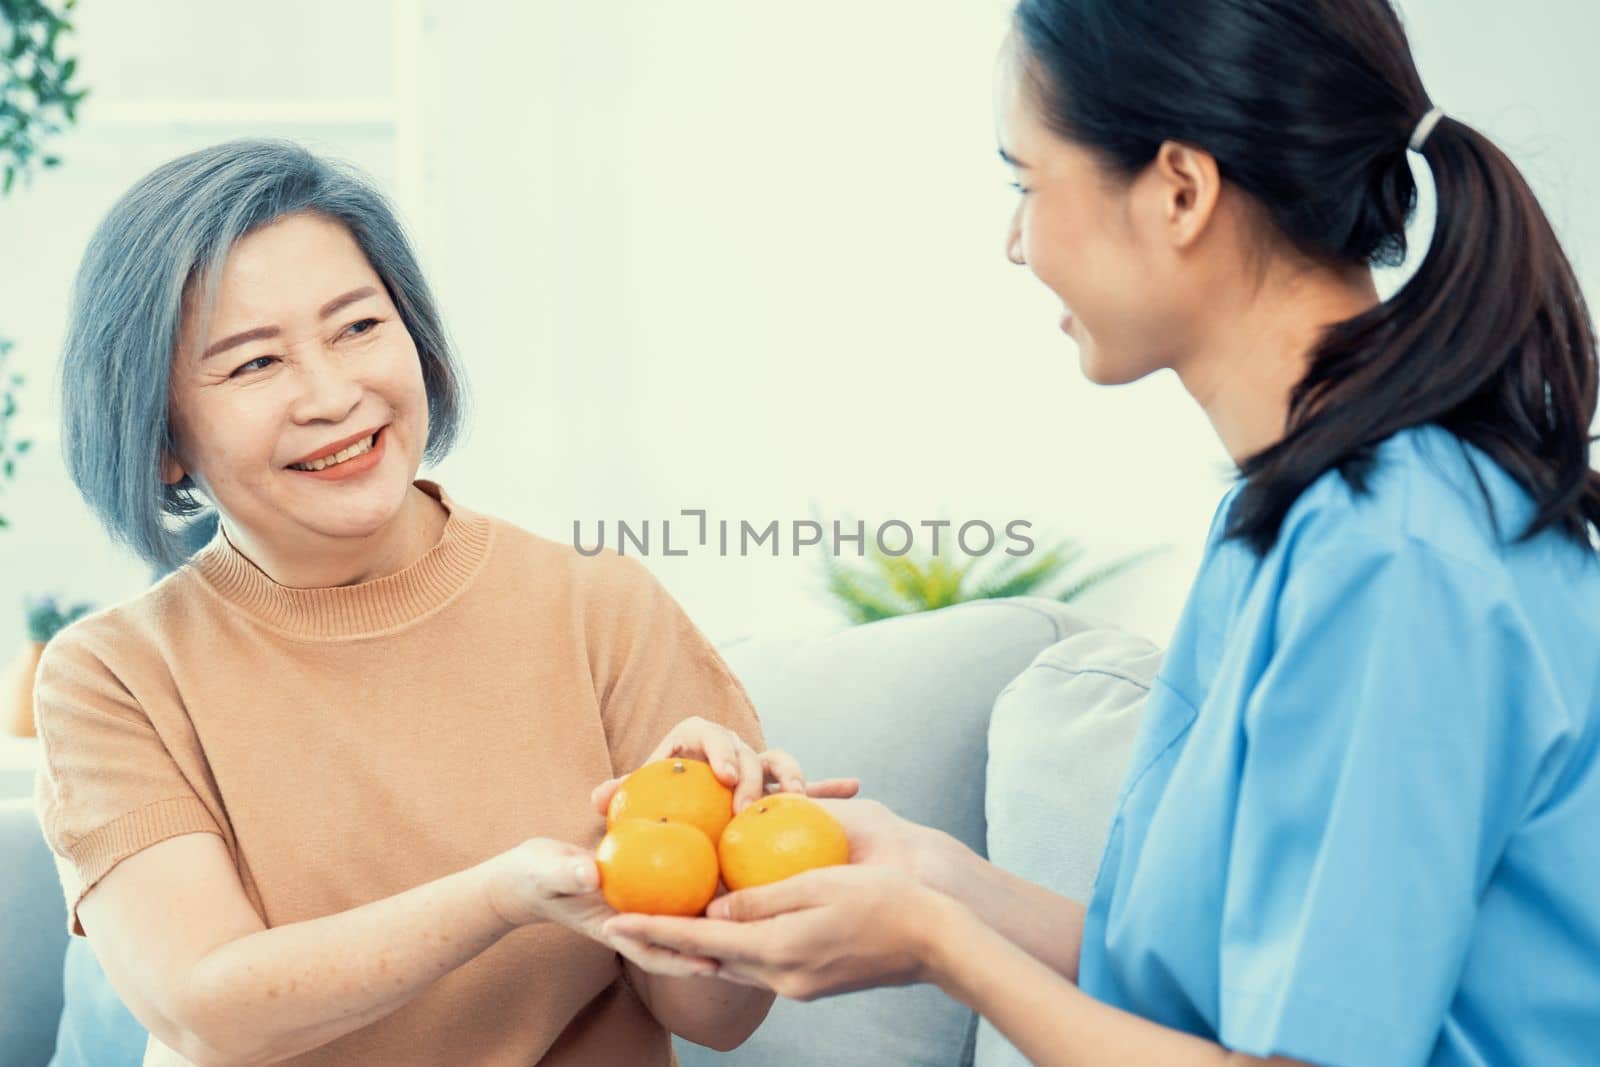 A young caregiver handing oranges to her contented senior patient at the living room. Senior care services, home visit by medical.